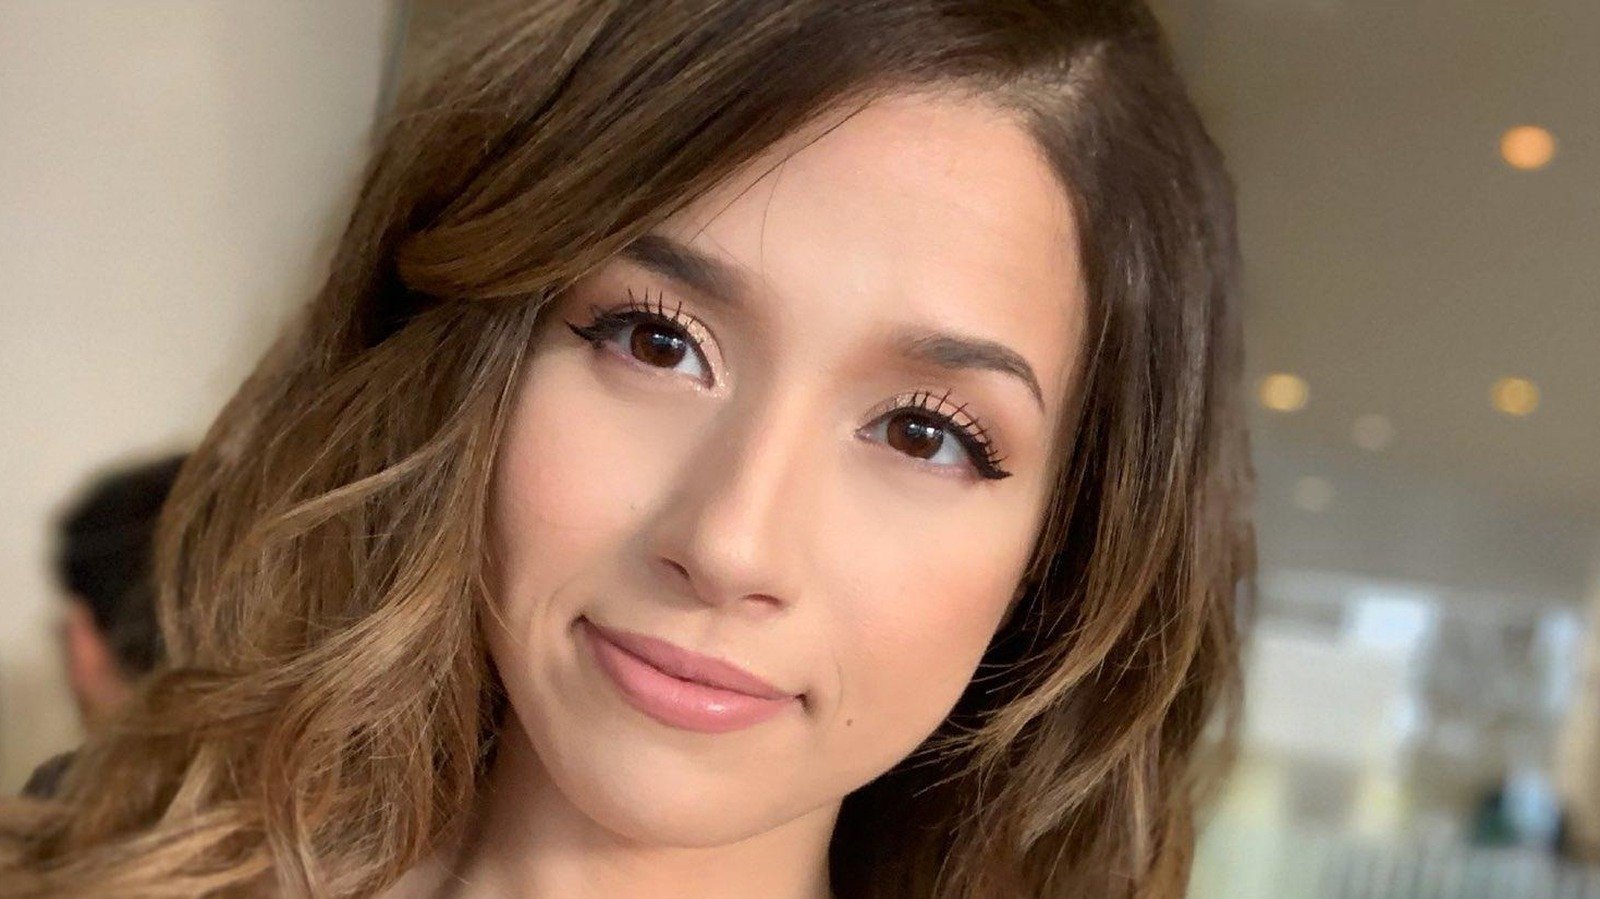 The Bizarre Story Behind Pokimane's Rise To Fame